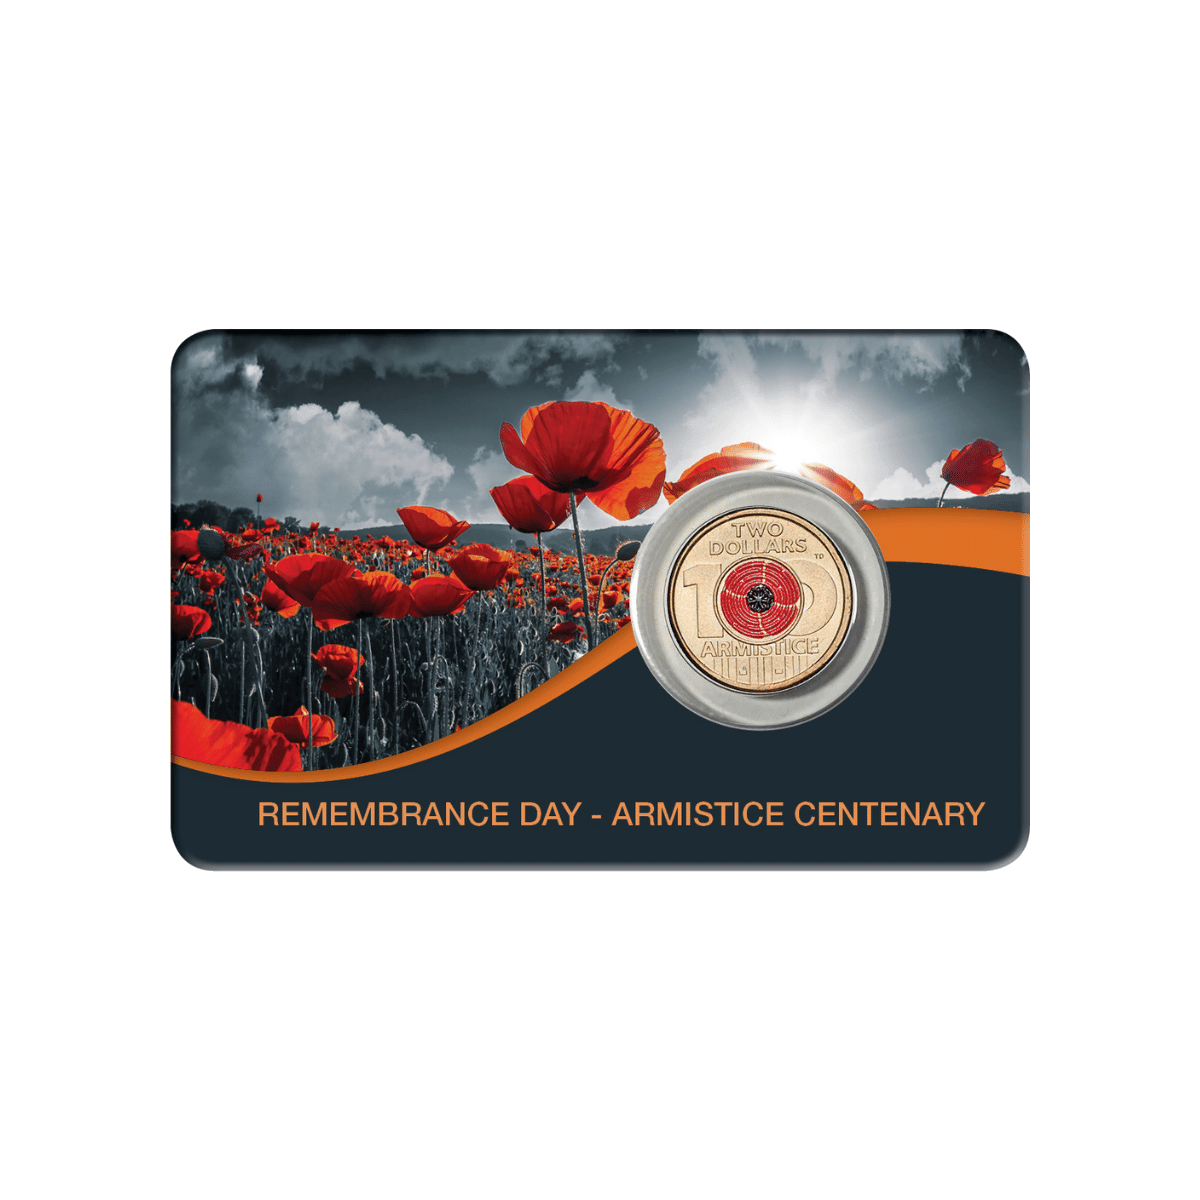  2018 $2 Remembrance Day Armistice Centenary  Al-Br Coin Pack Style 2